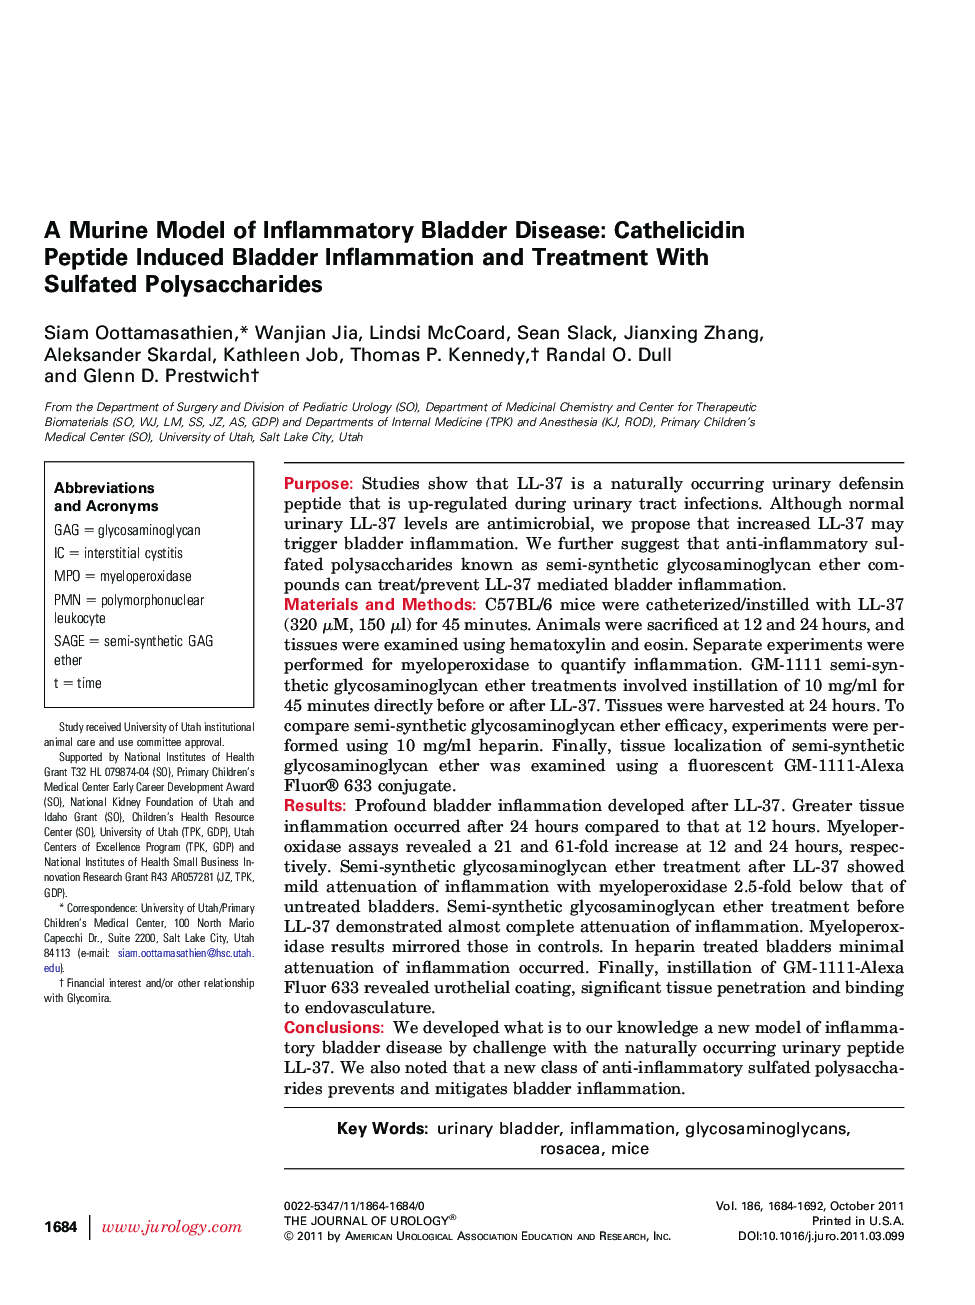 A Murine Model of Inflammatory Bladder Disease: Cathelicidin Peptide Induced Bladder Inflammation and Treatment With Sulfated Polysaccharides